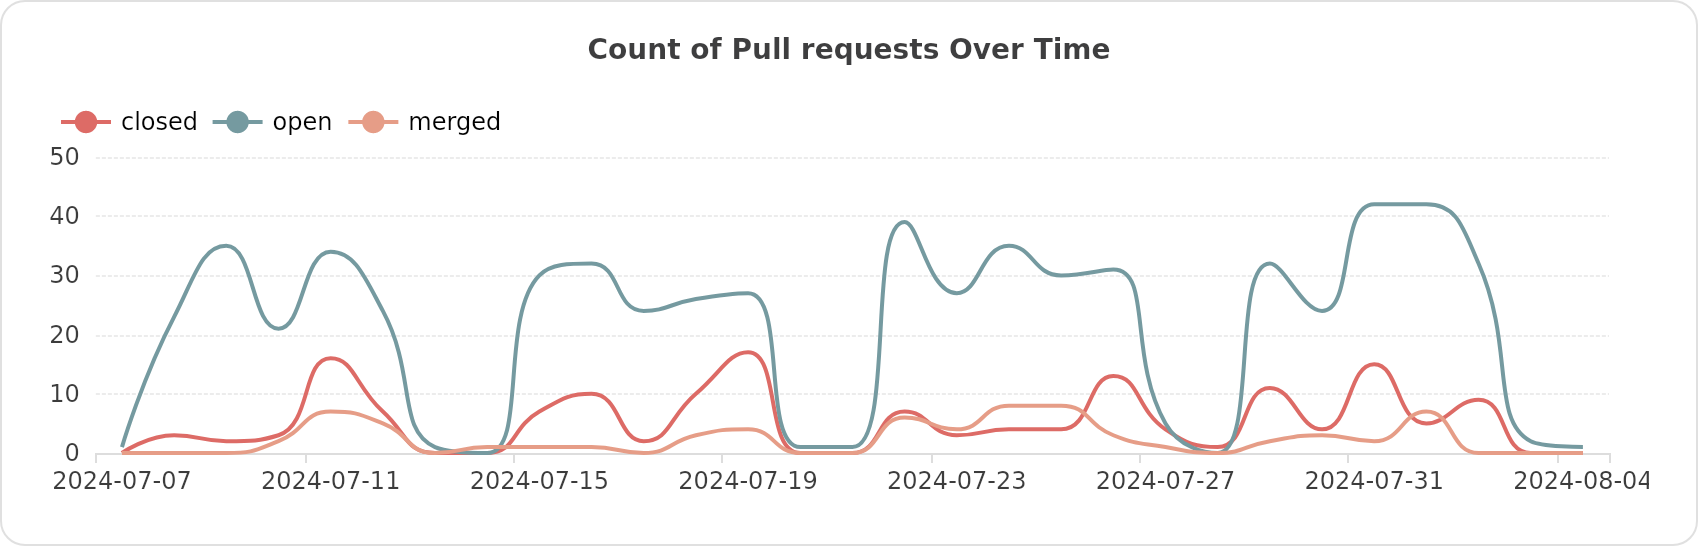 Count of Pull requests Over Time